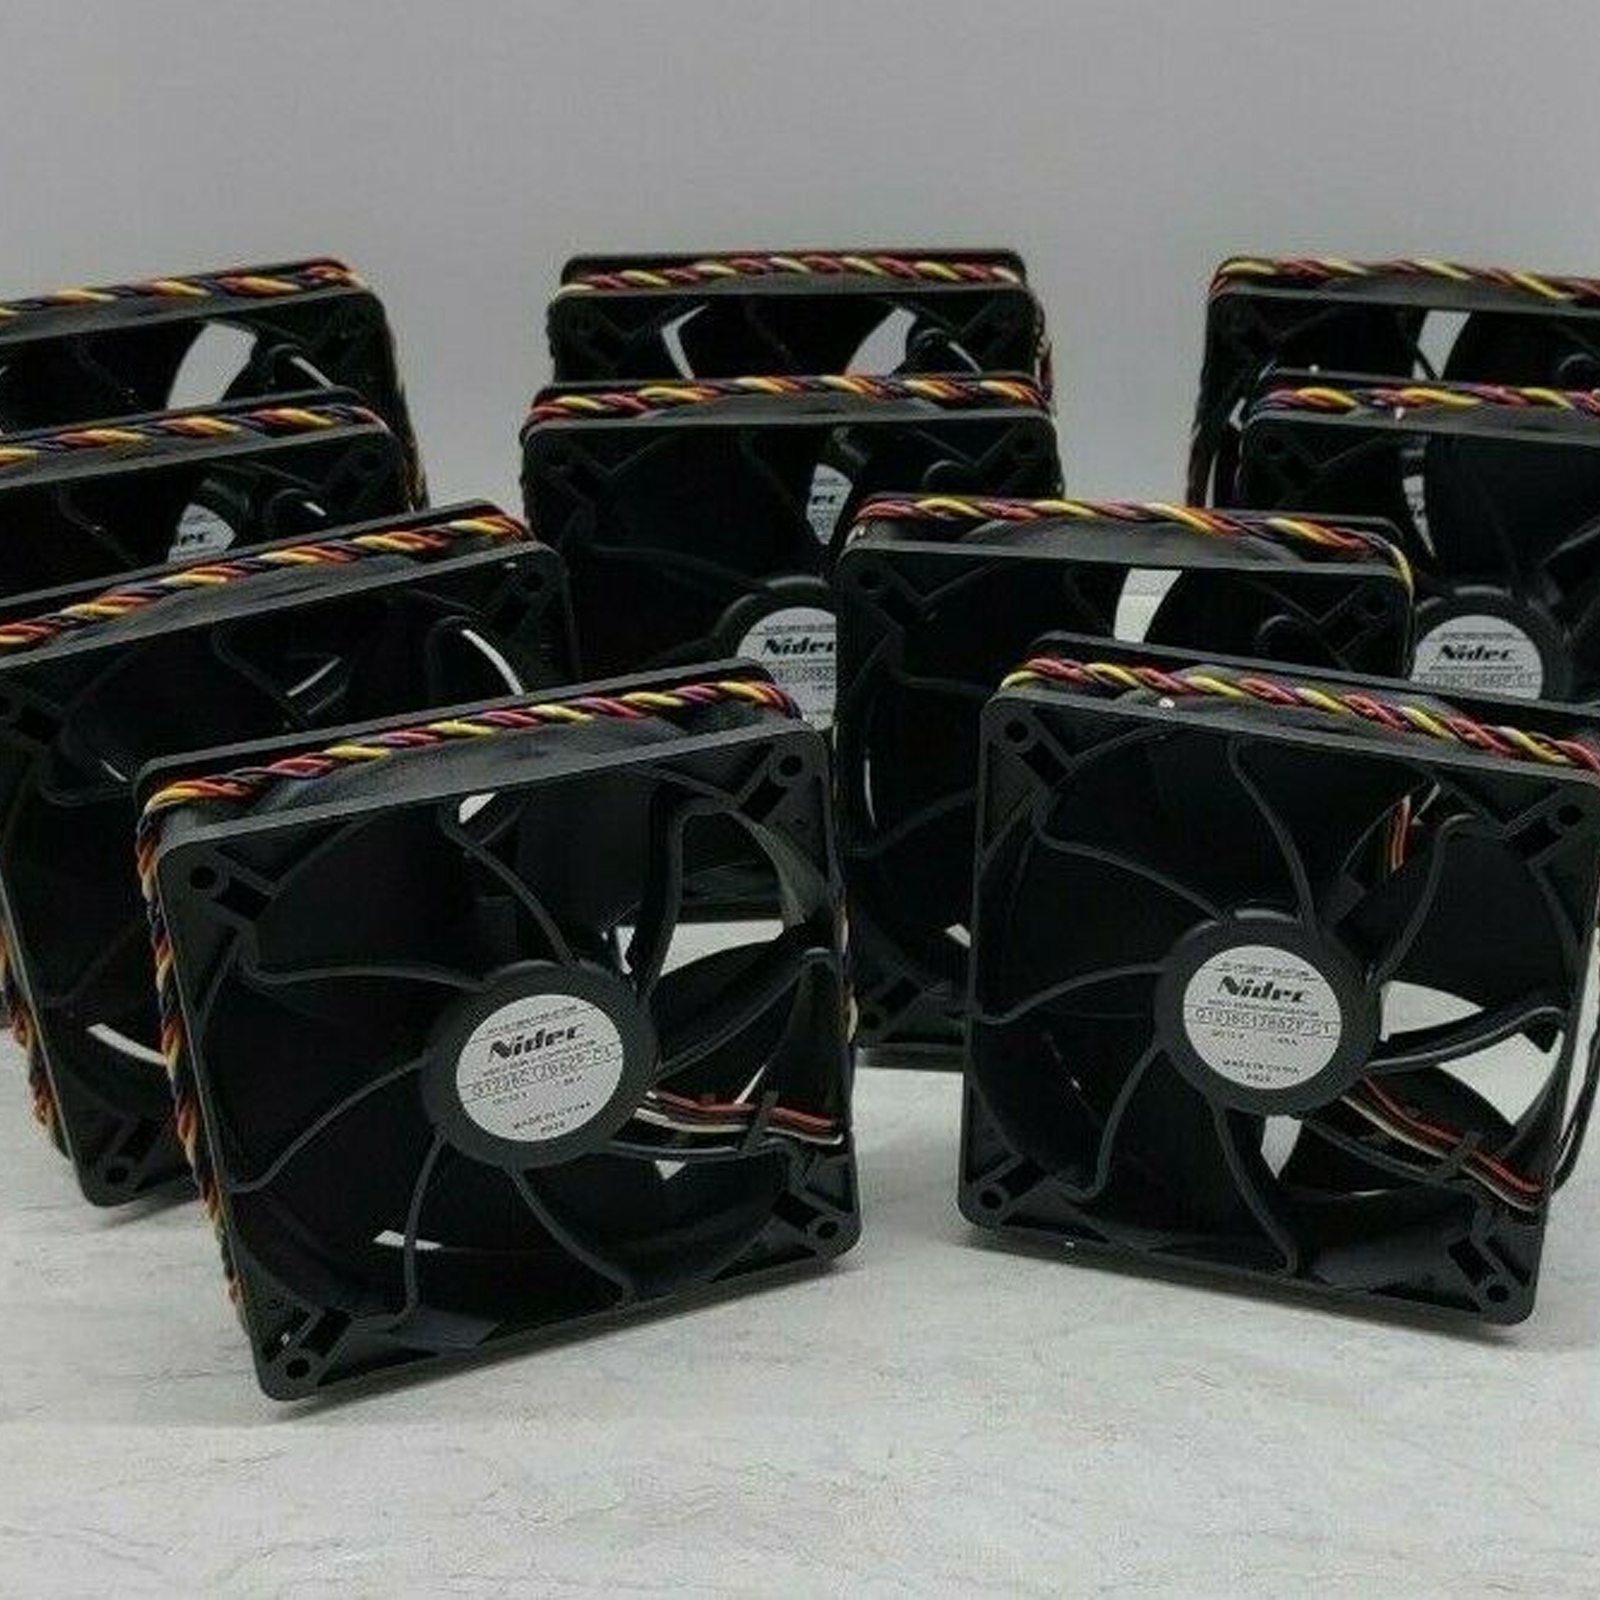 【Supreme】 Dc 12v 1.85a Antminer Fan Replacement For S7 T9 S9 L3 L3 D3 A3 T15 S15 T17 S17 S19 6000 Rpm Black